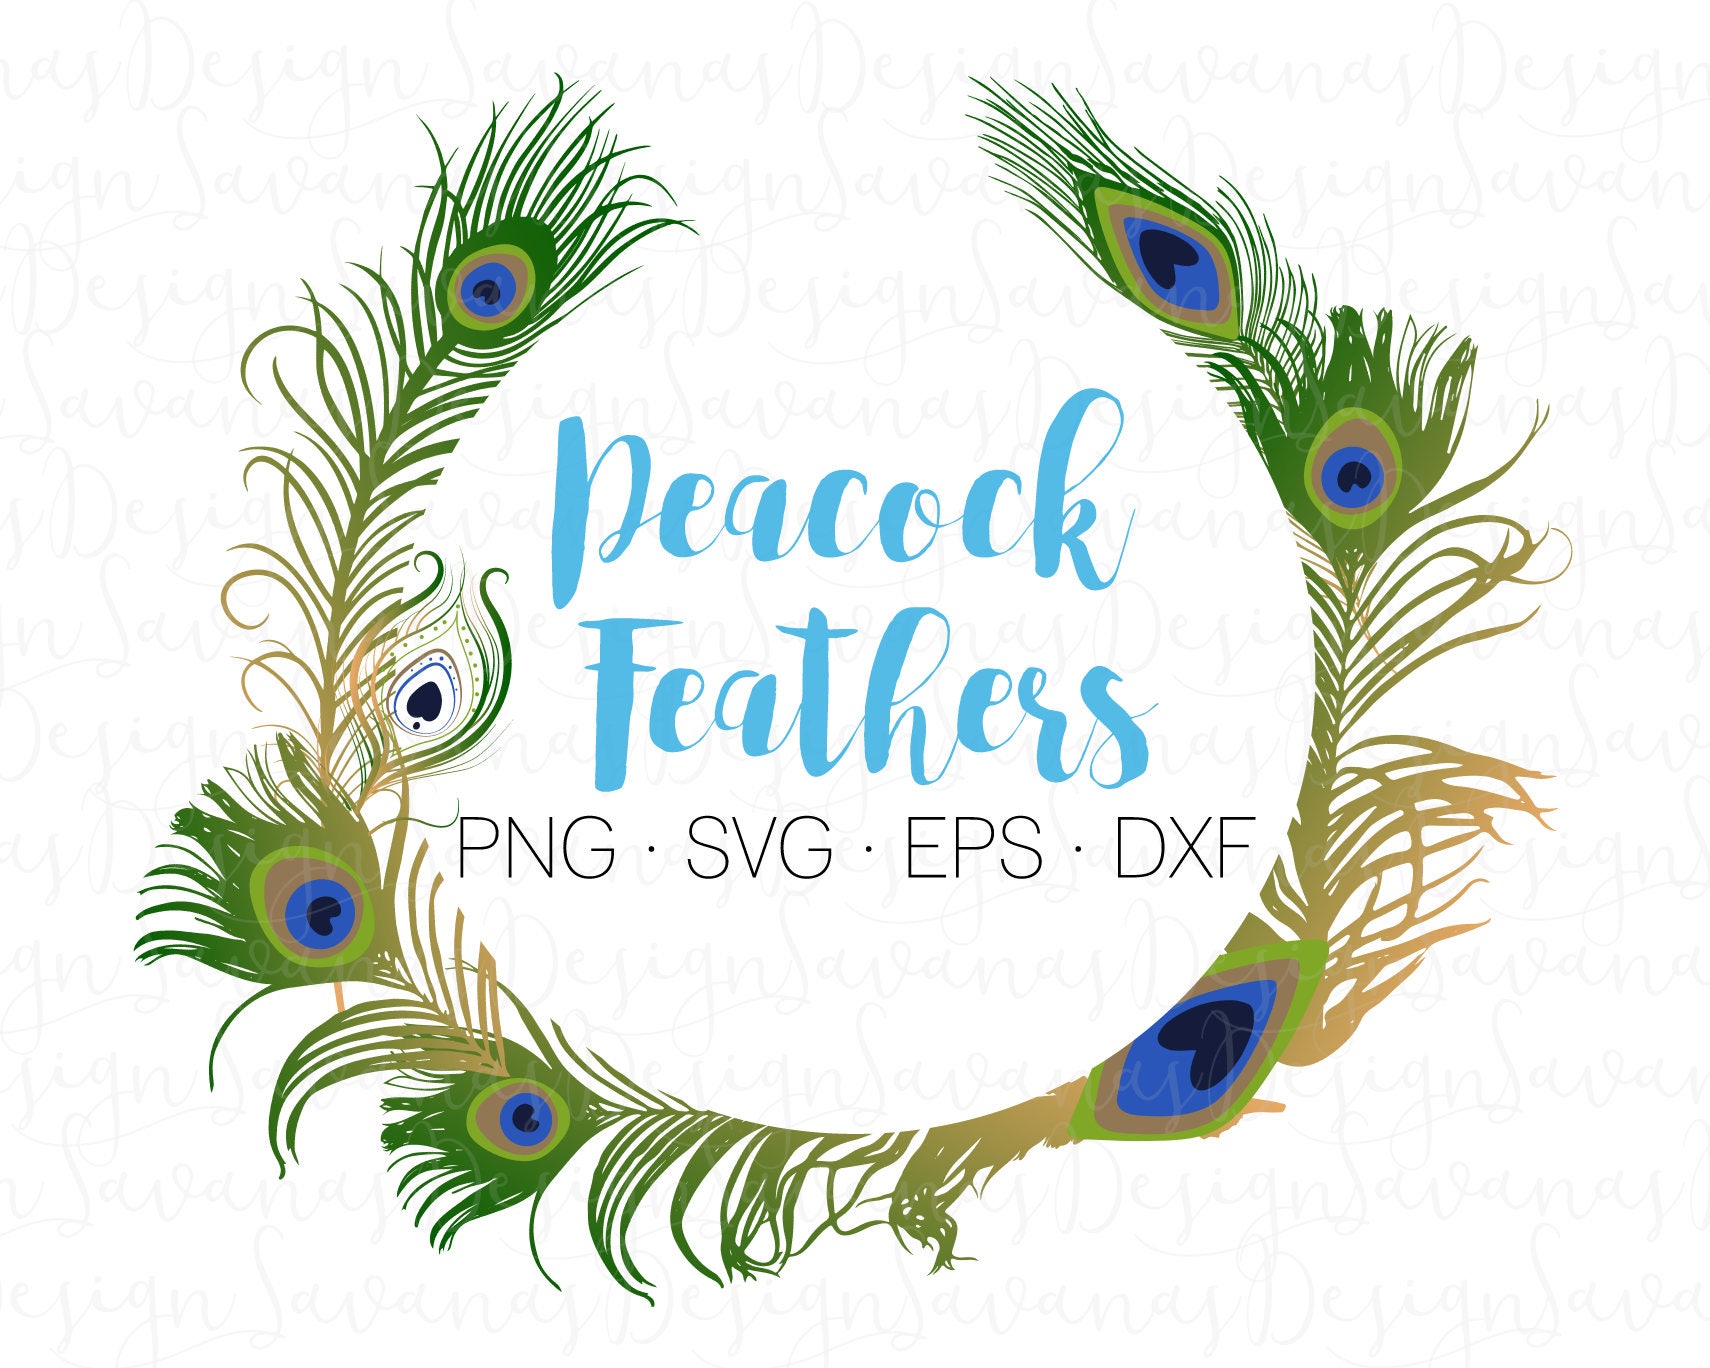 Download Peacock feathers svg peafowl feathers peacock svg peacock